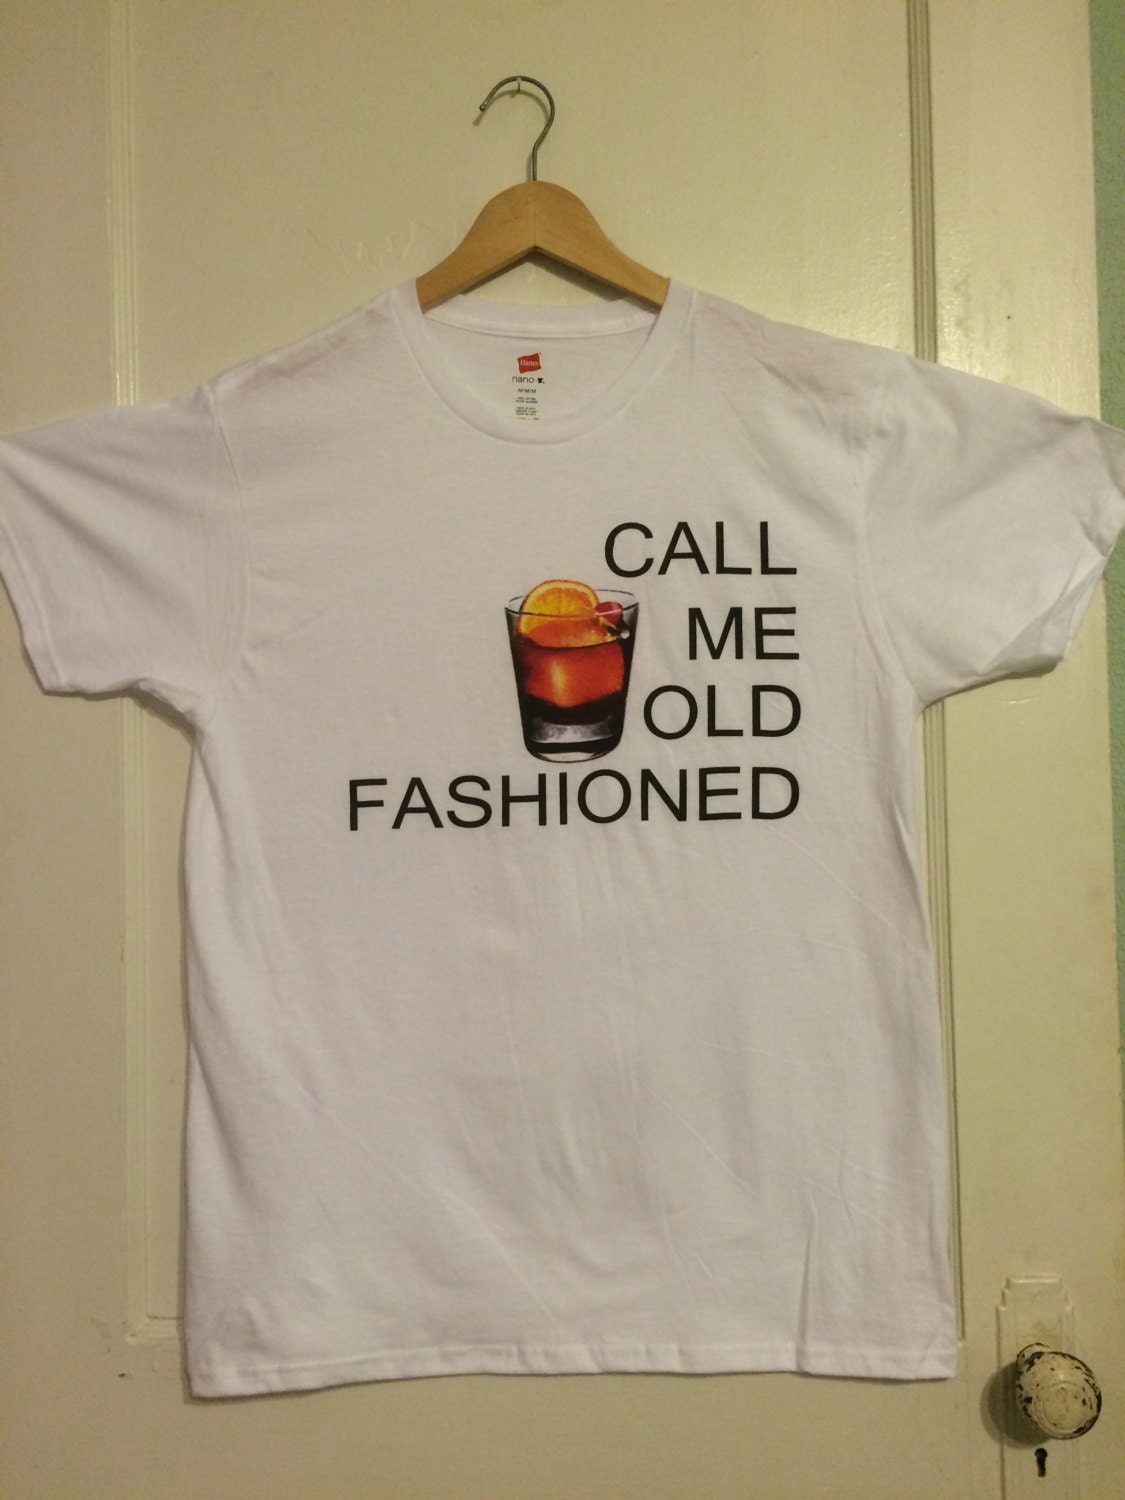 Call Me Old Fashioned. Custom Screen Printed t shirt. by midblink